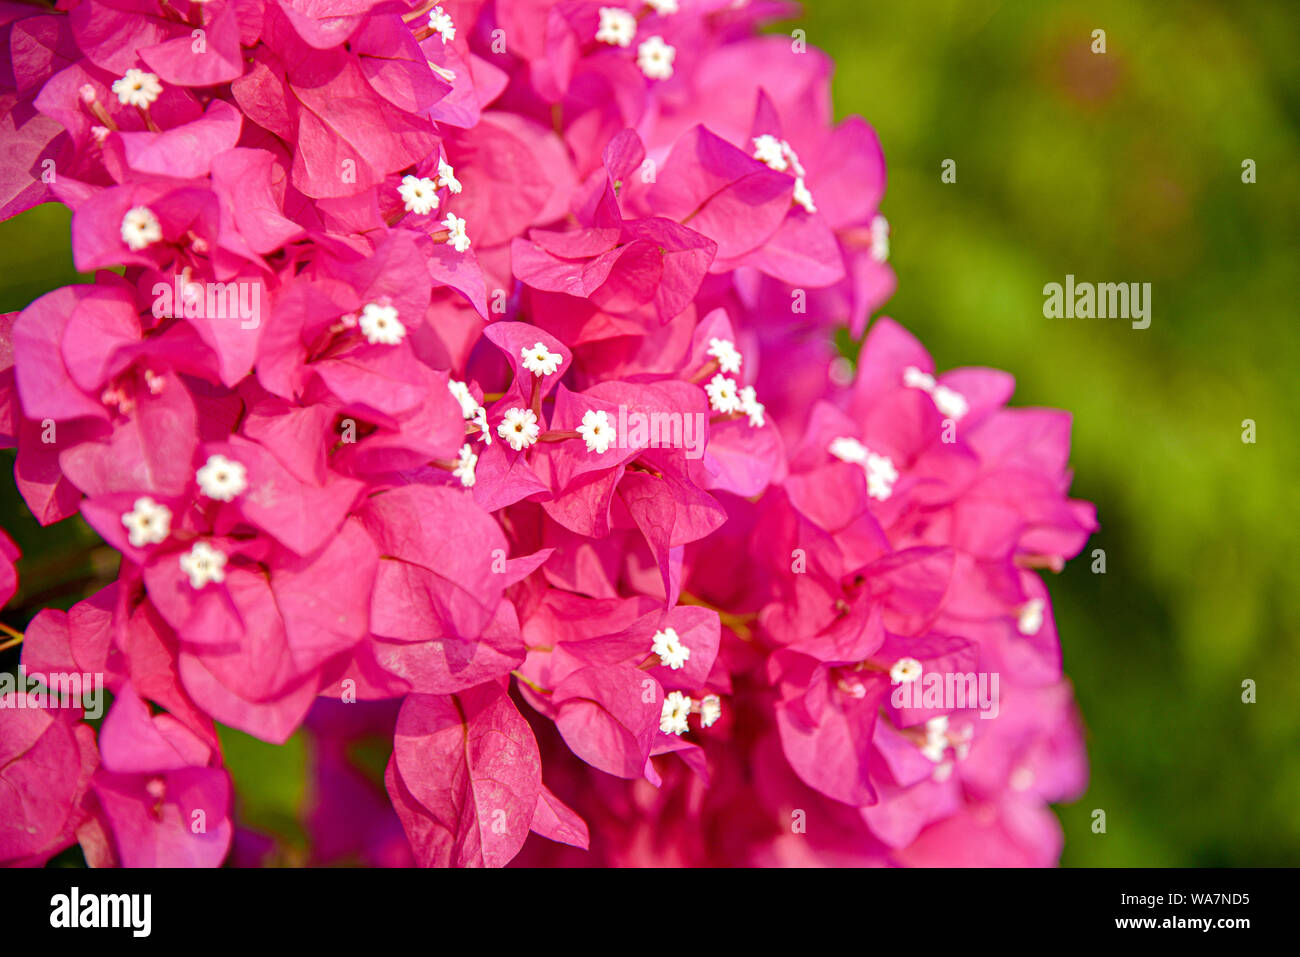 Magenta bougainvillea flower in Thailand. Pink petal blossom flowers. Stock Photo